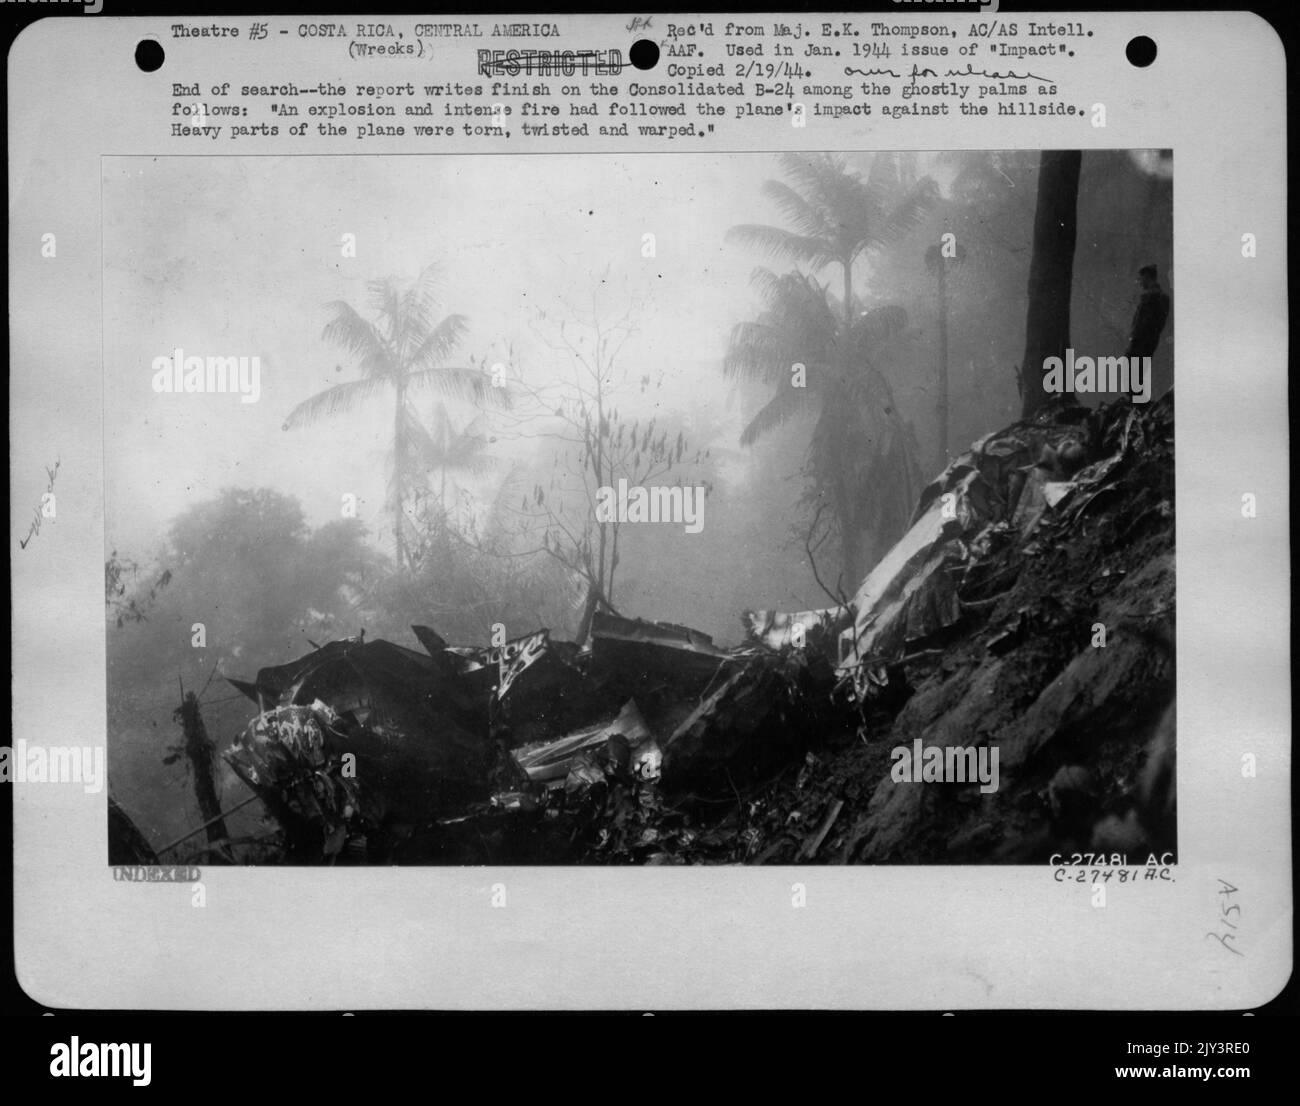 End of search - the report writes finish on the Consolidated B-24 among the ghostly palms as follows: 'An explosion and intense fire had followed the plane's impact against the hillside. Heavy parts of the plane were torn, twisted and warped.' Stock Photo